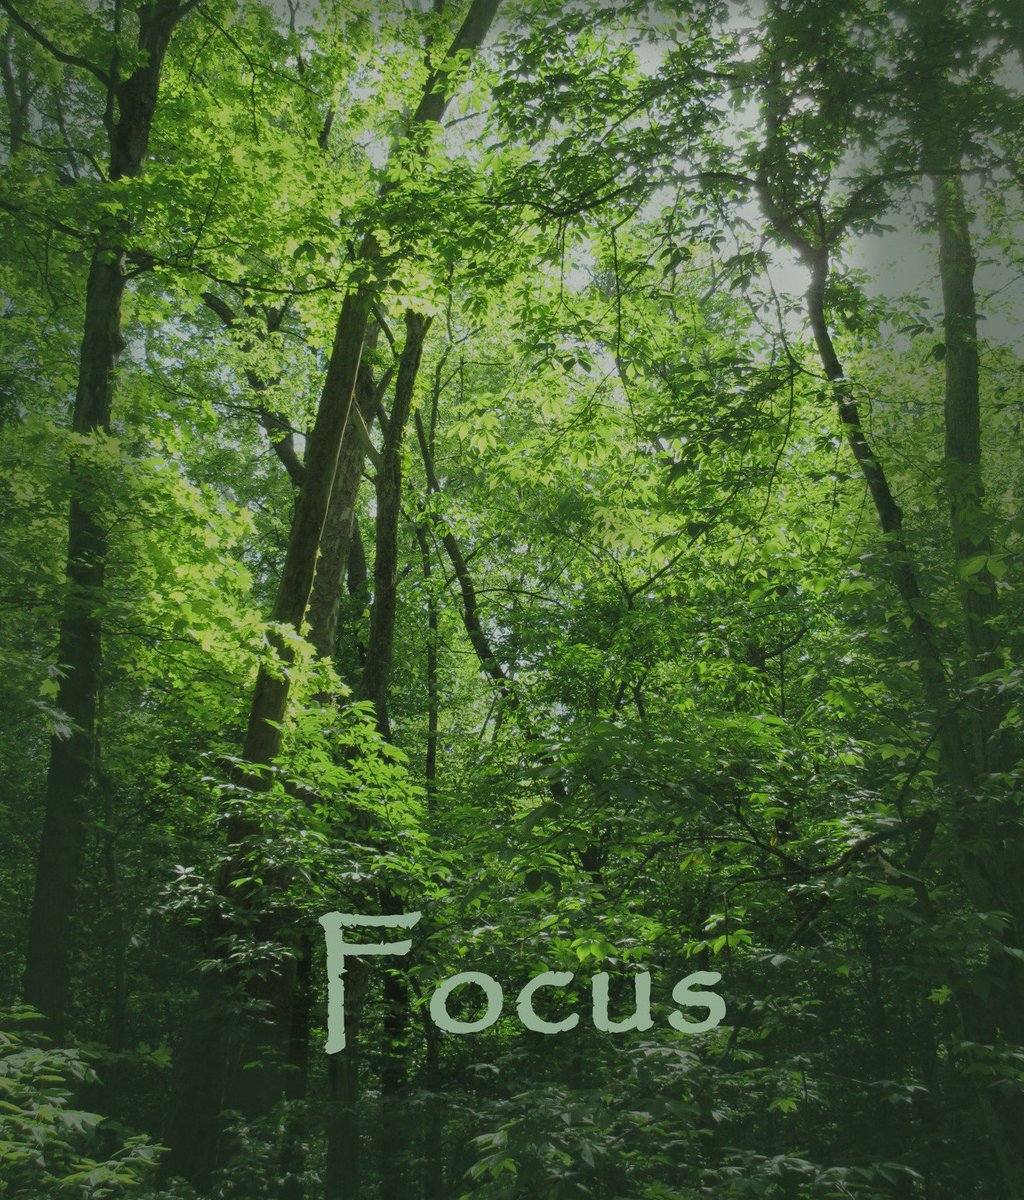 “Focus and get a clear, compelling vision of what you want.” Tony Robbins
.
#inspiration #getfocused #makeaplan #tonyrobbins #quoteinspo